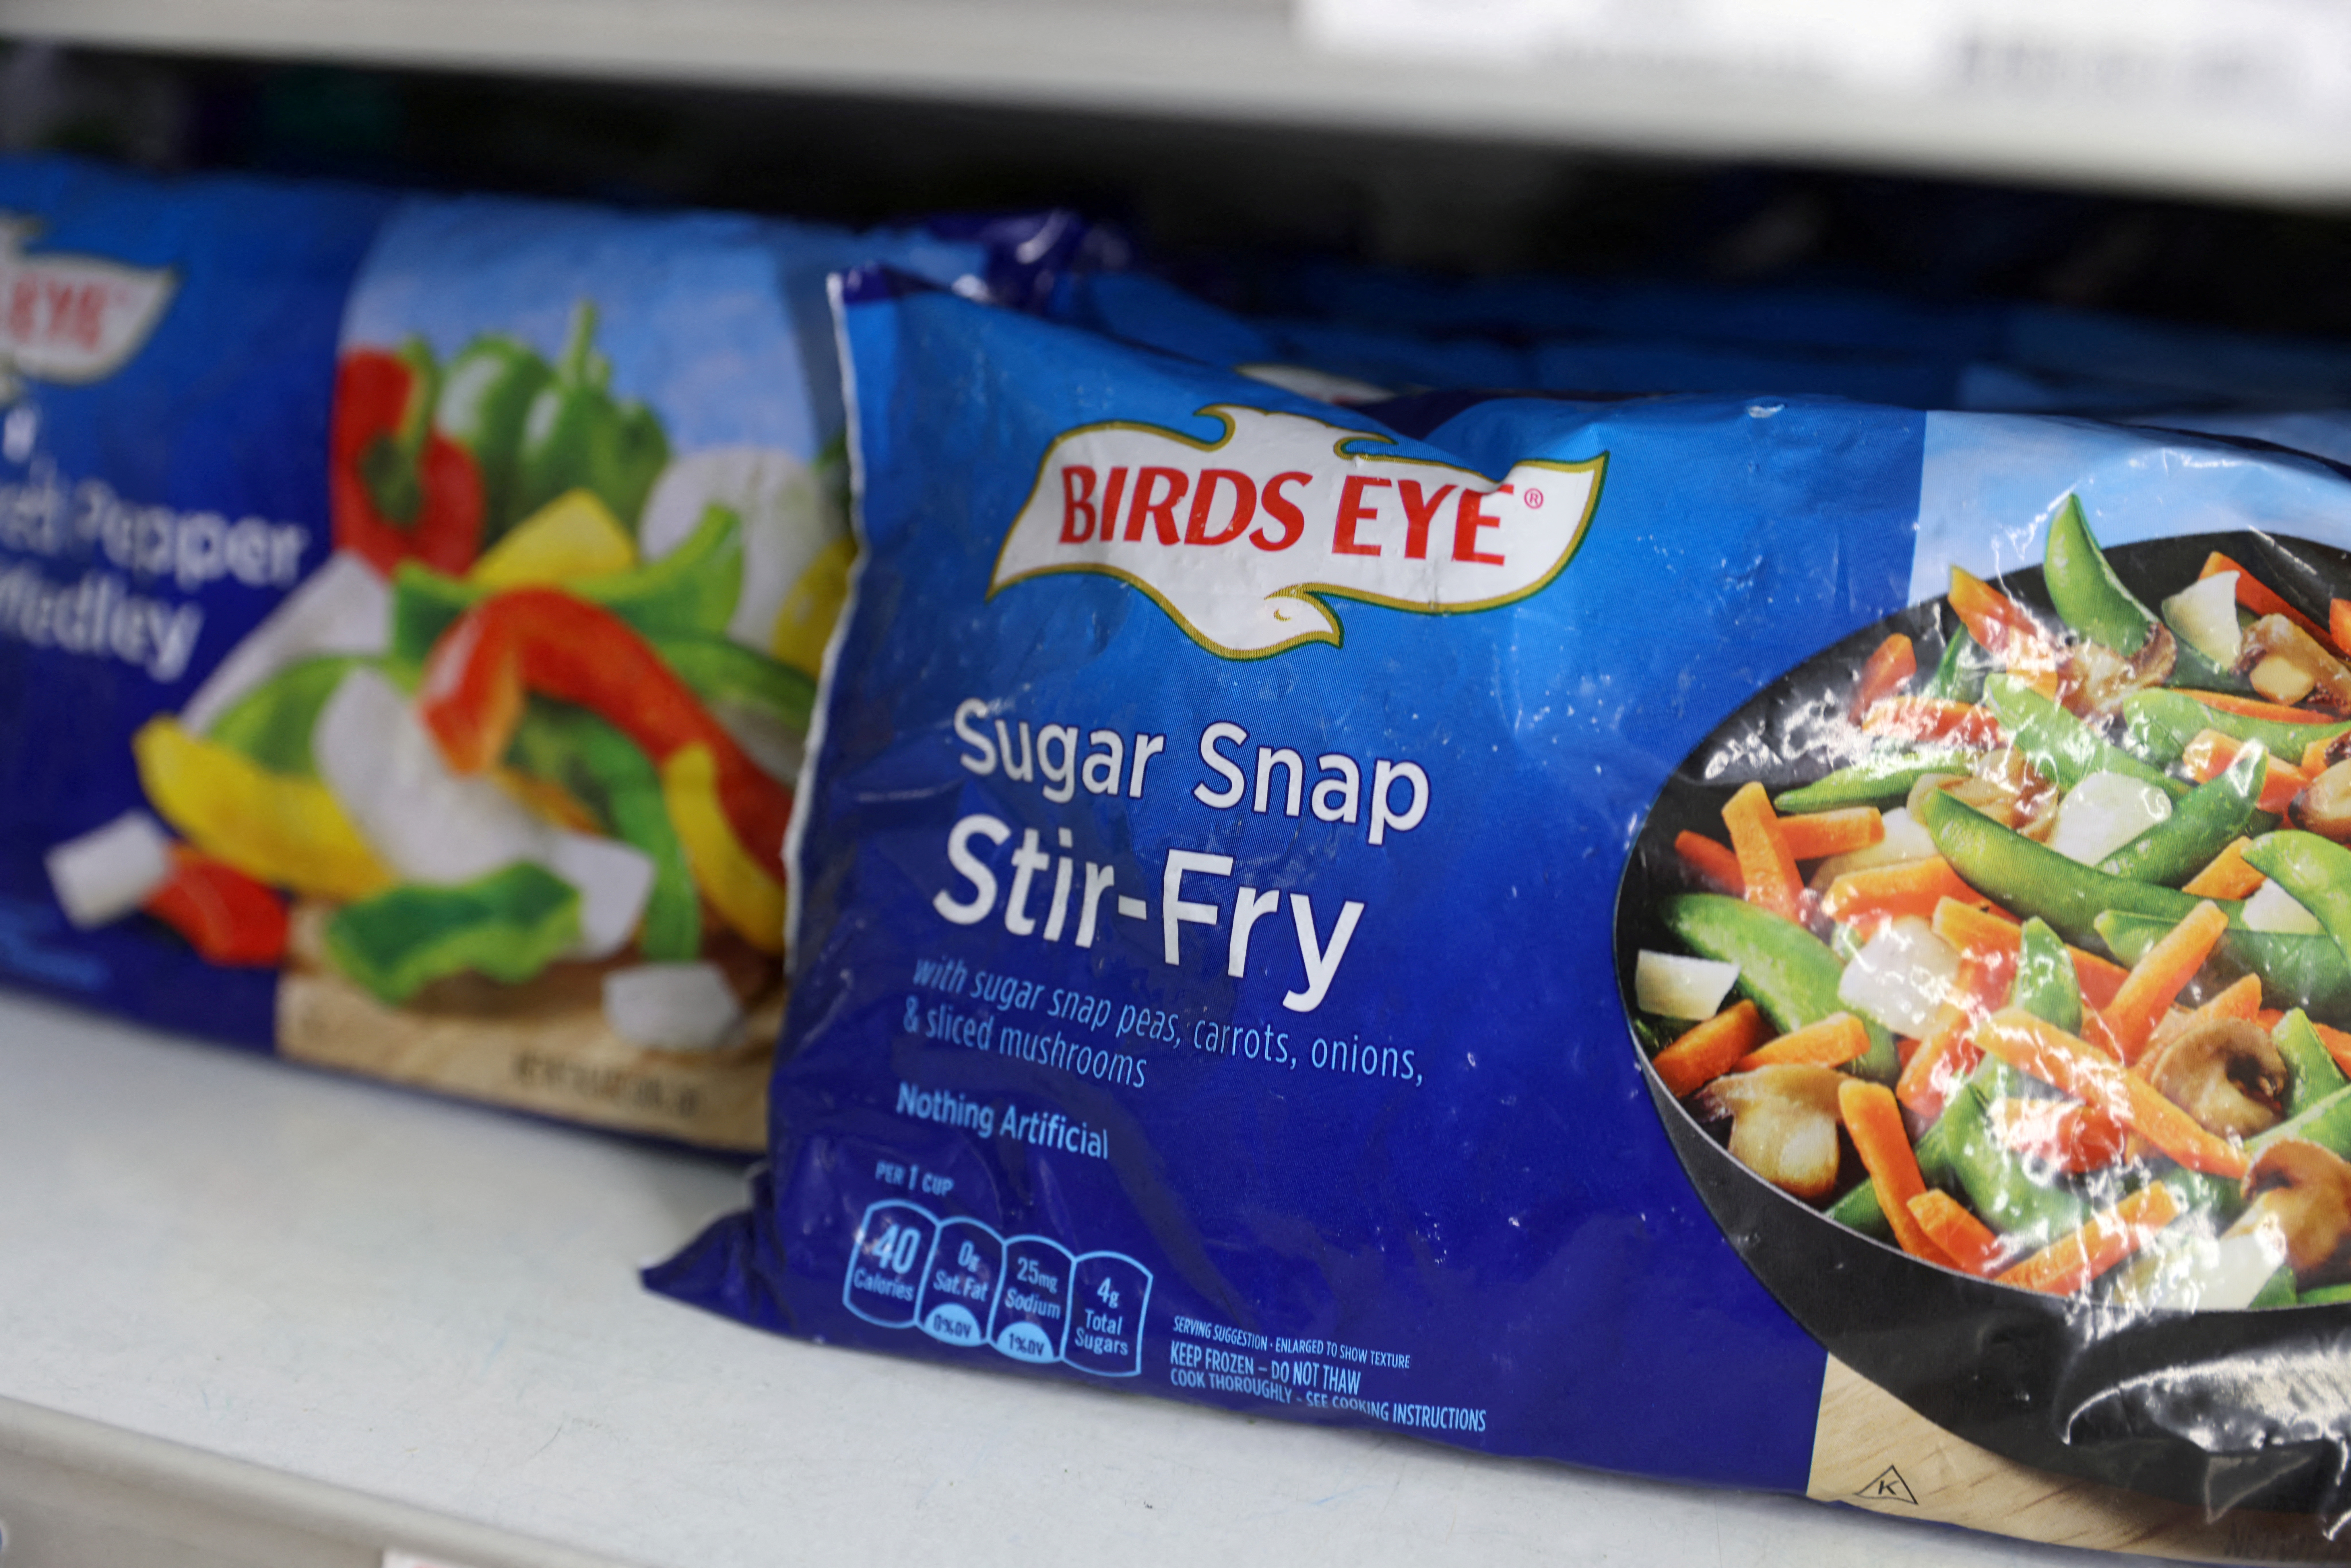 Packets of Birds Eye foods, a brand owned by Conagra Brands, are seen in a store in Manhattan, New York